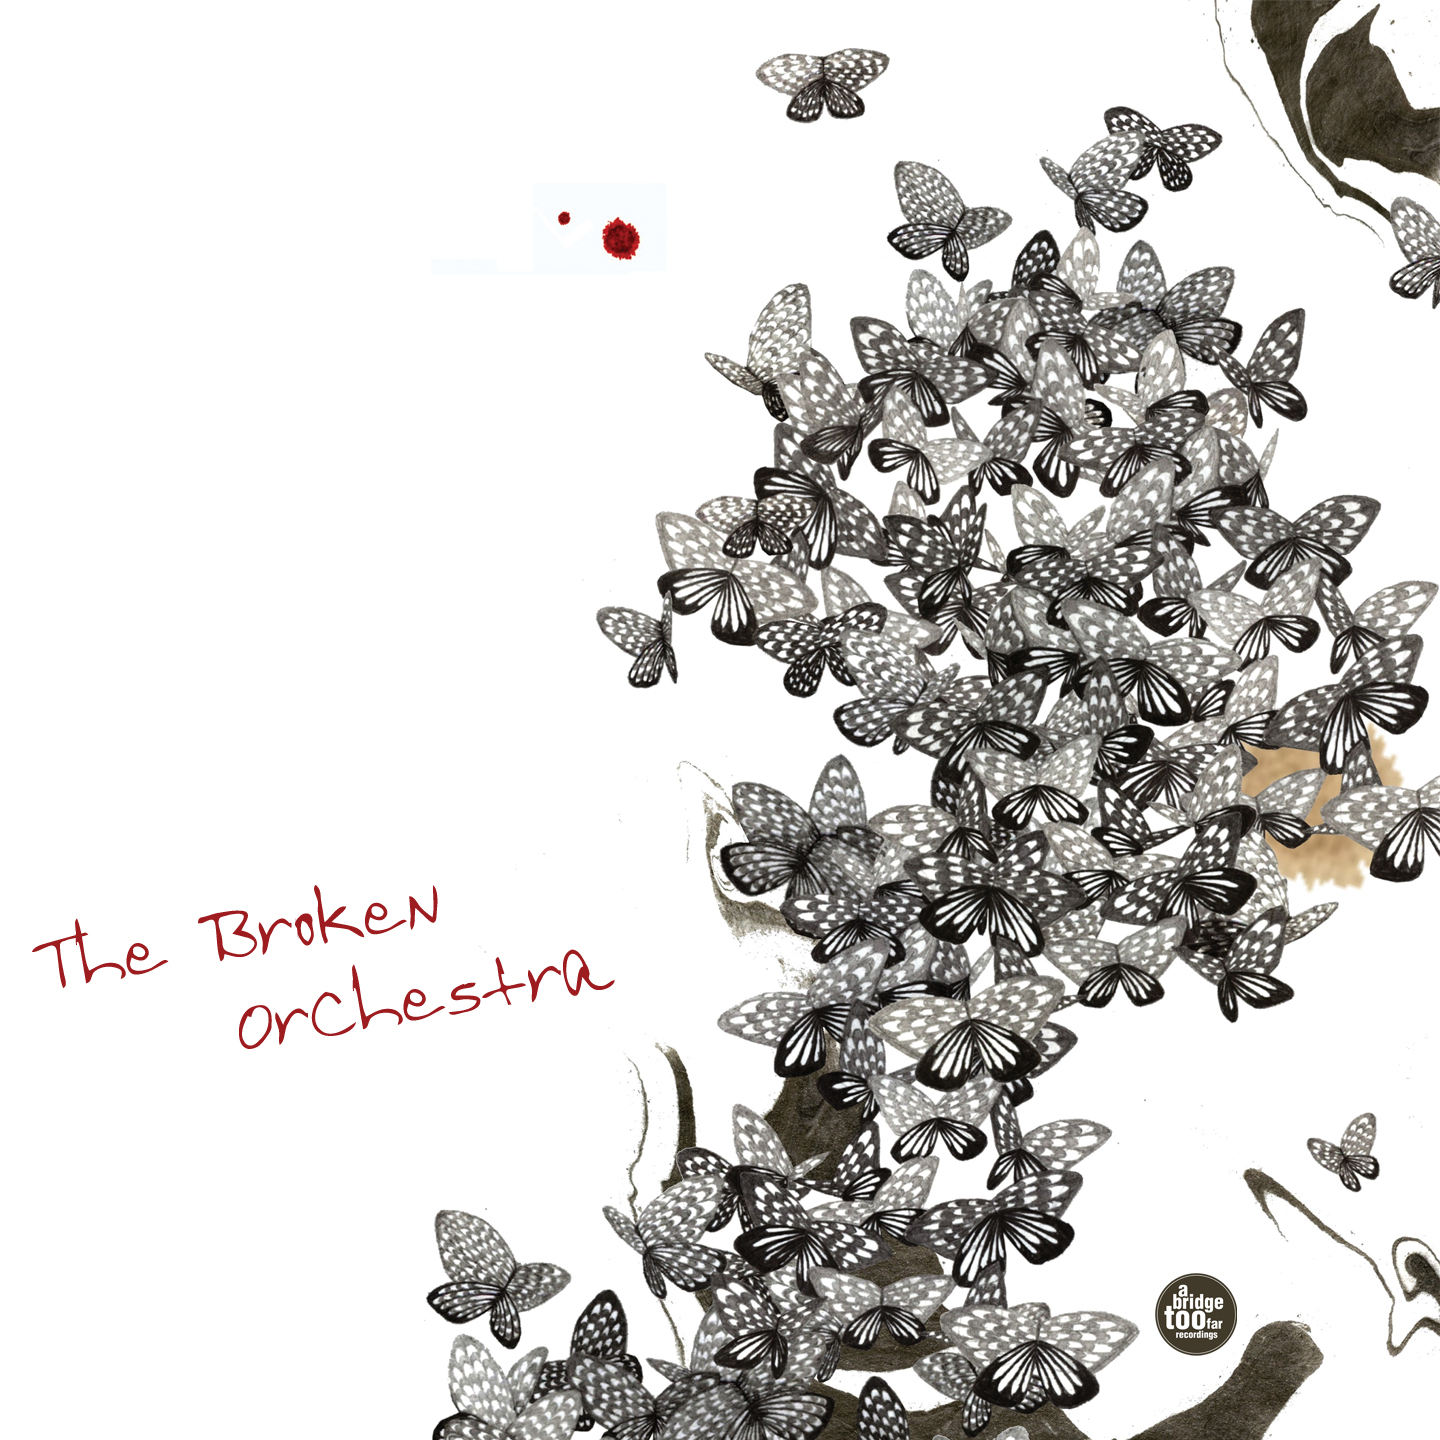 News: Blended sounds with Pat D’s The Broken Orchestra